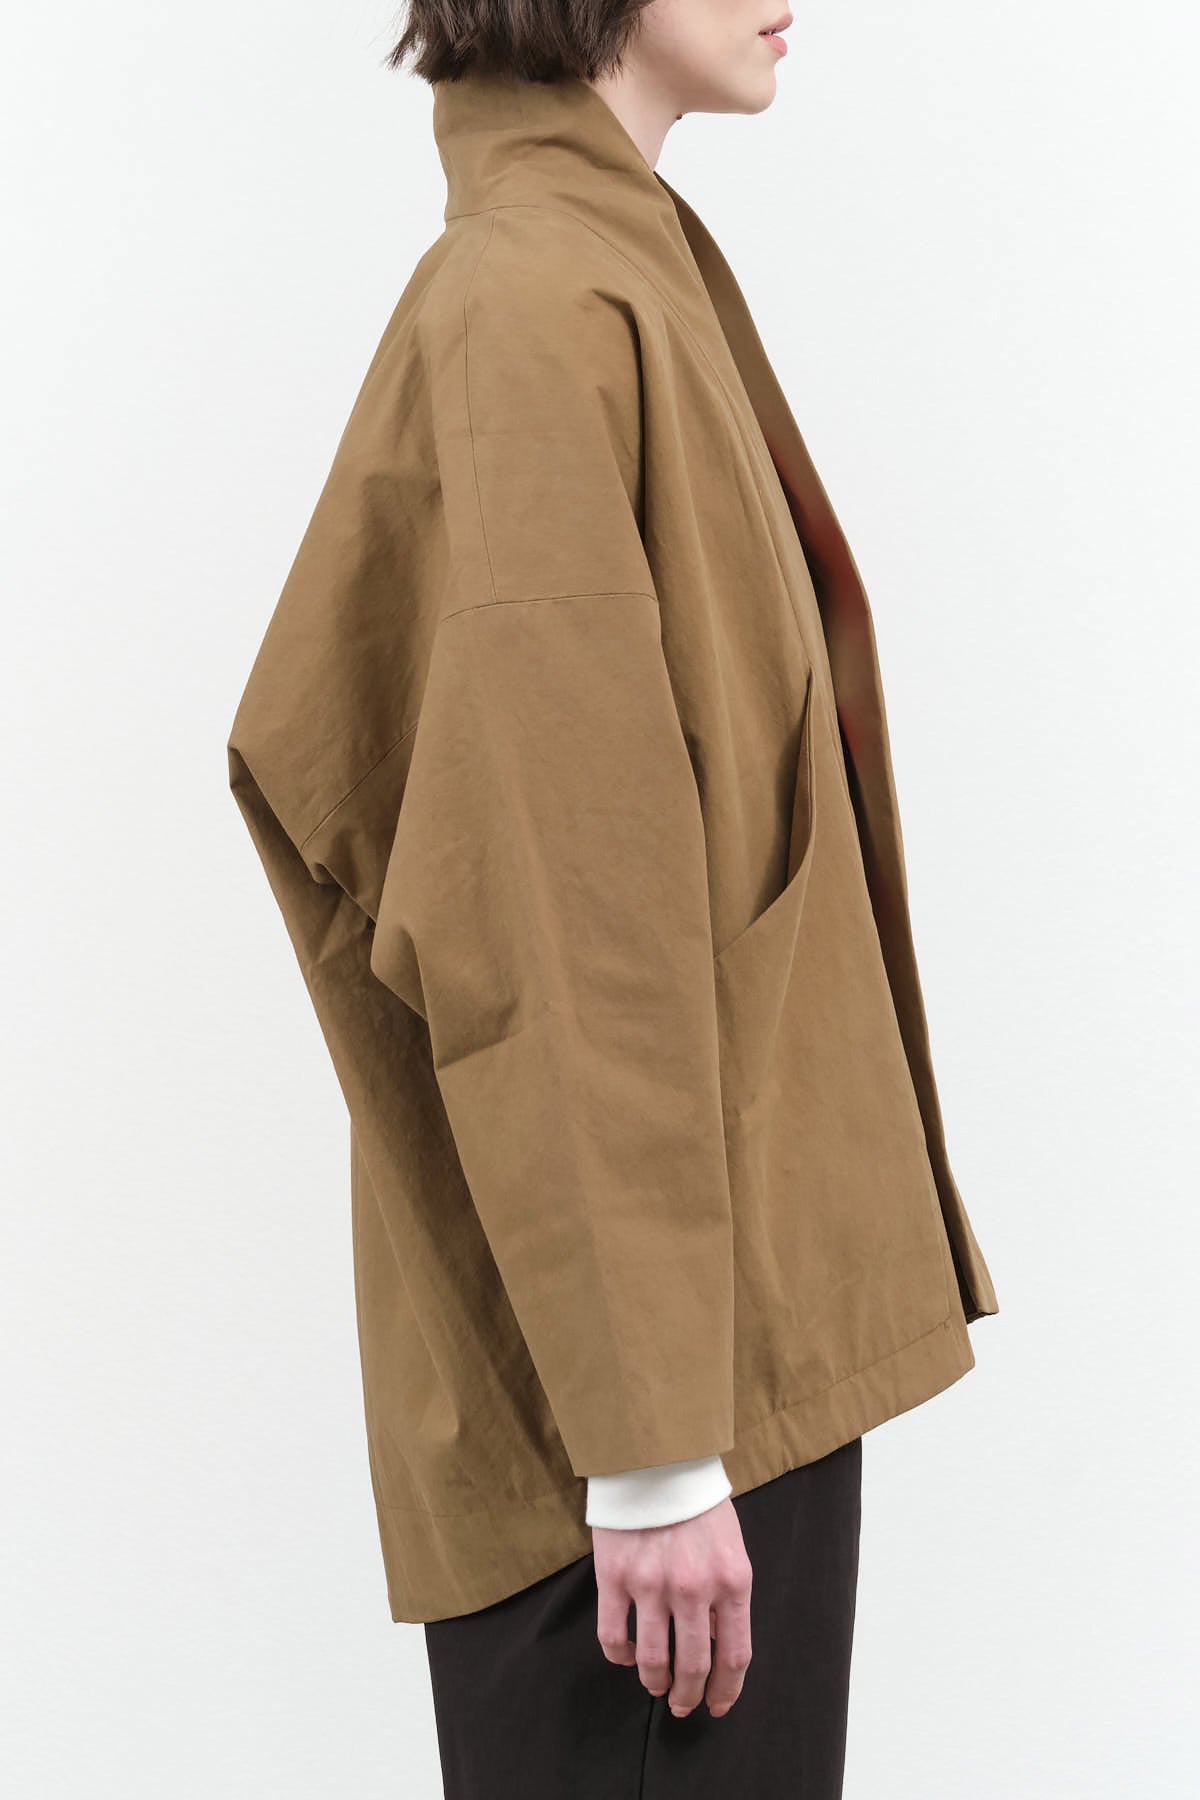 Side view of Signature Sumo Jacket